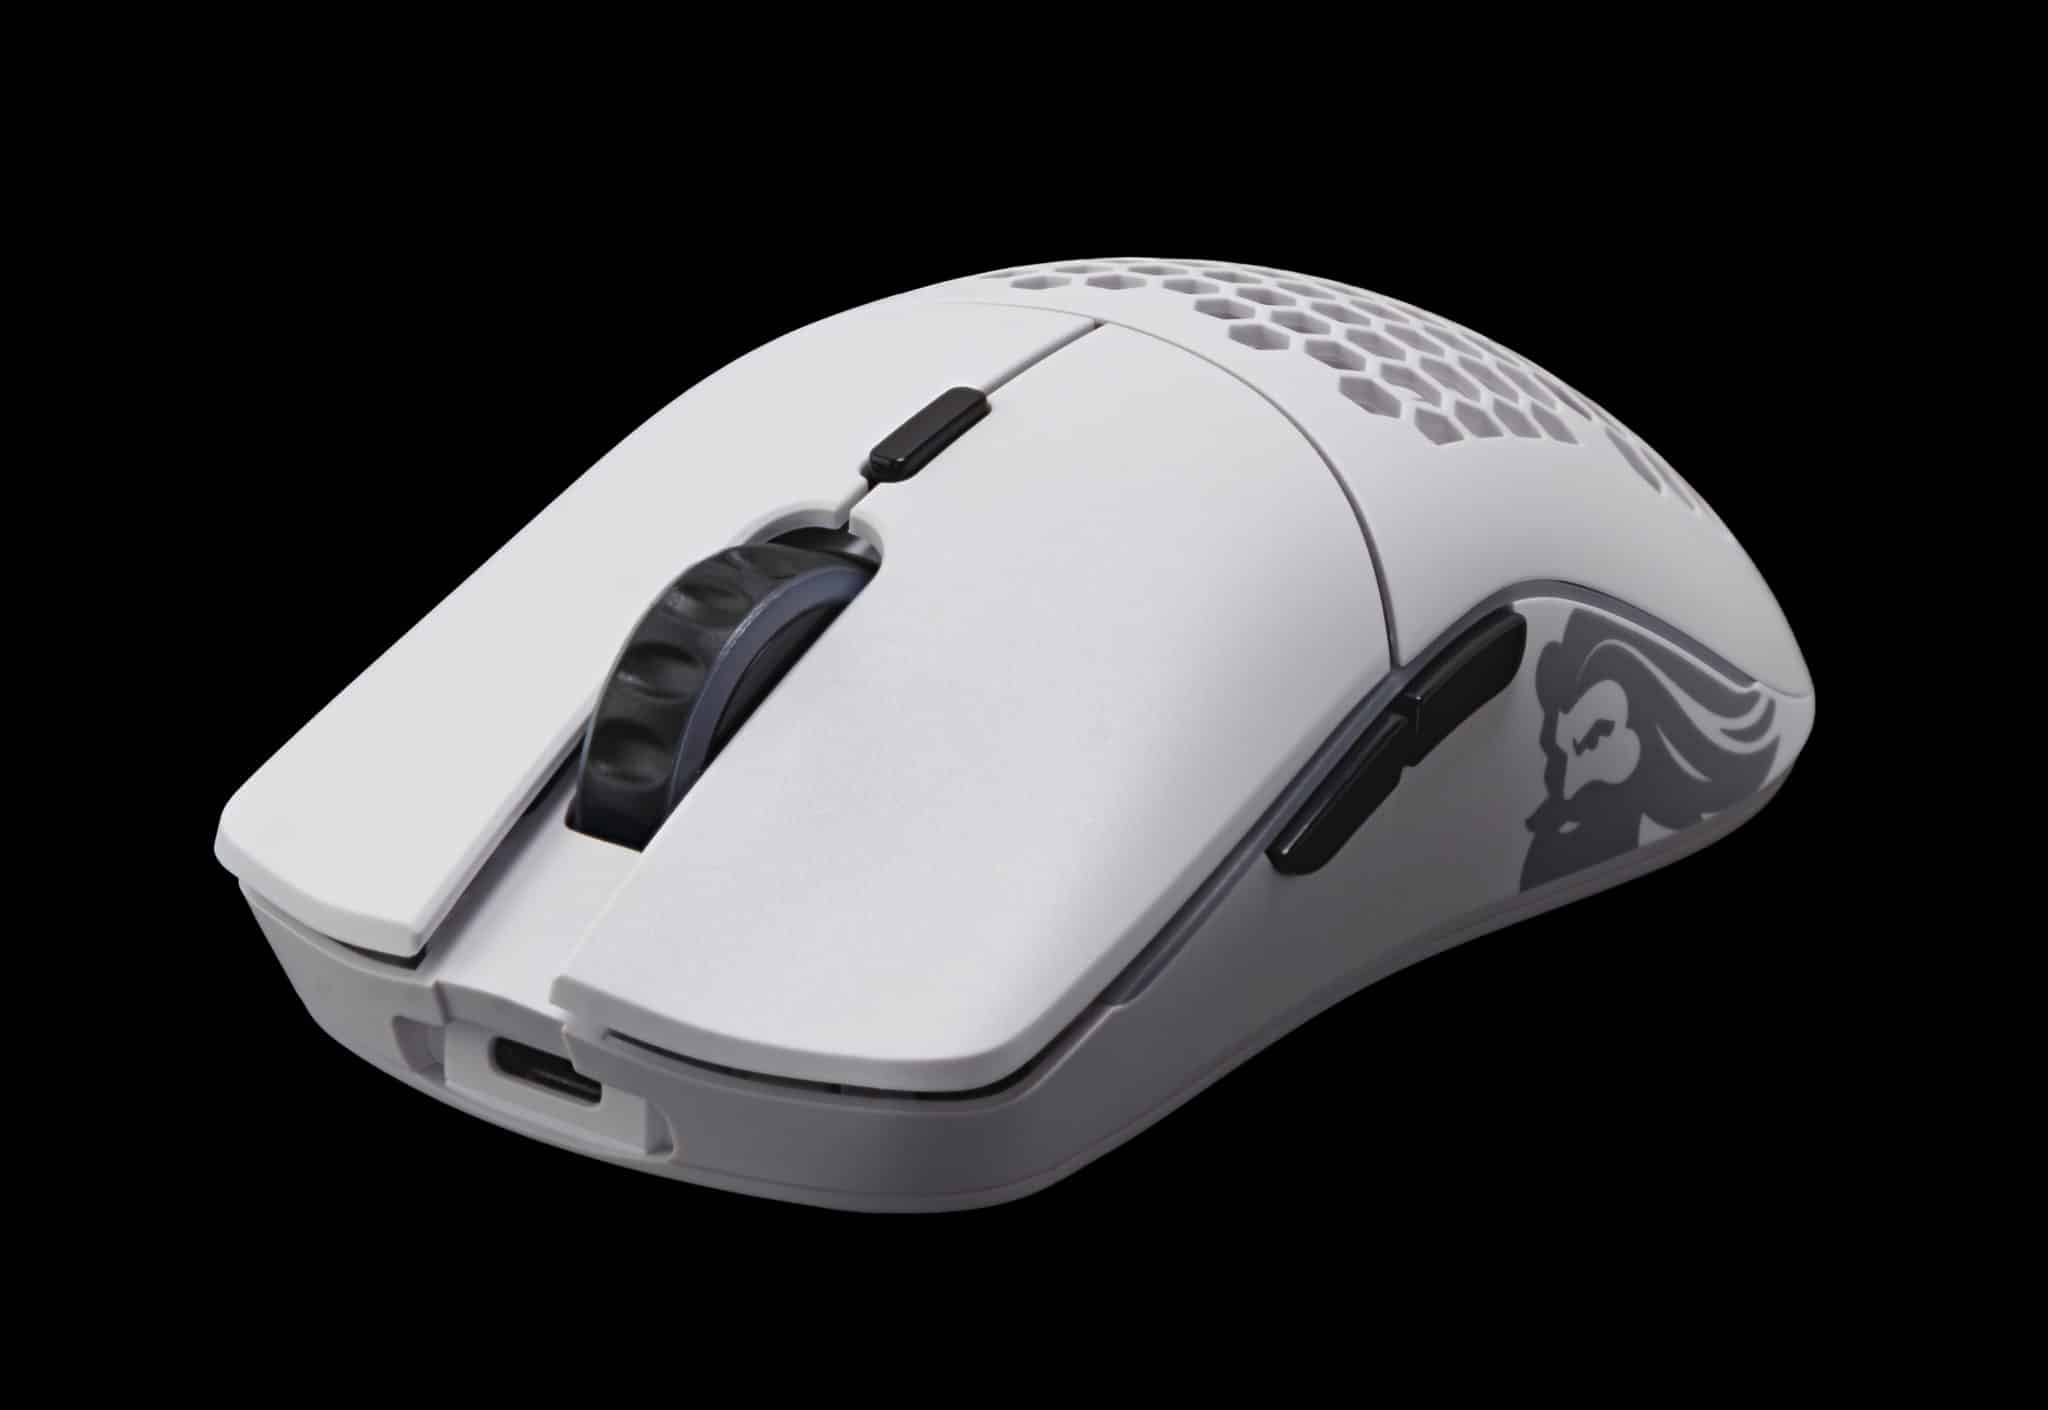  Glorious Model O- Wireless Mouse Review